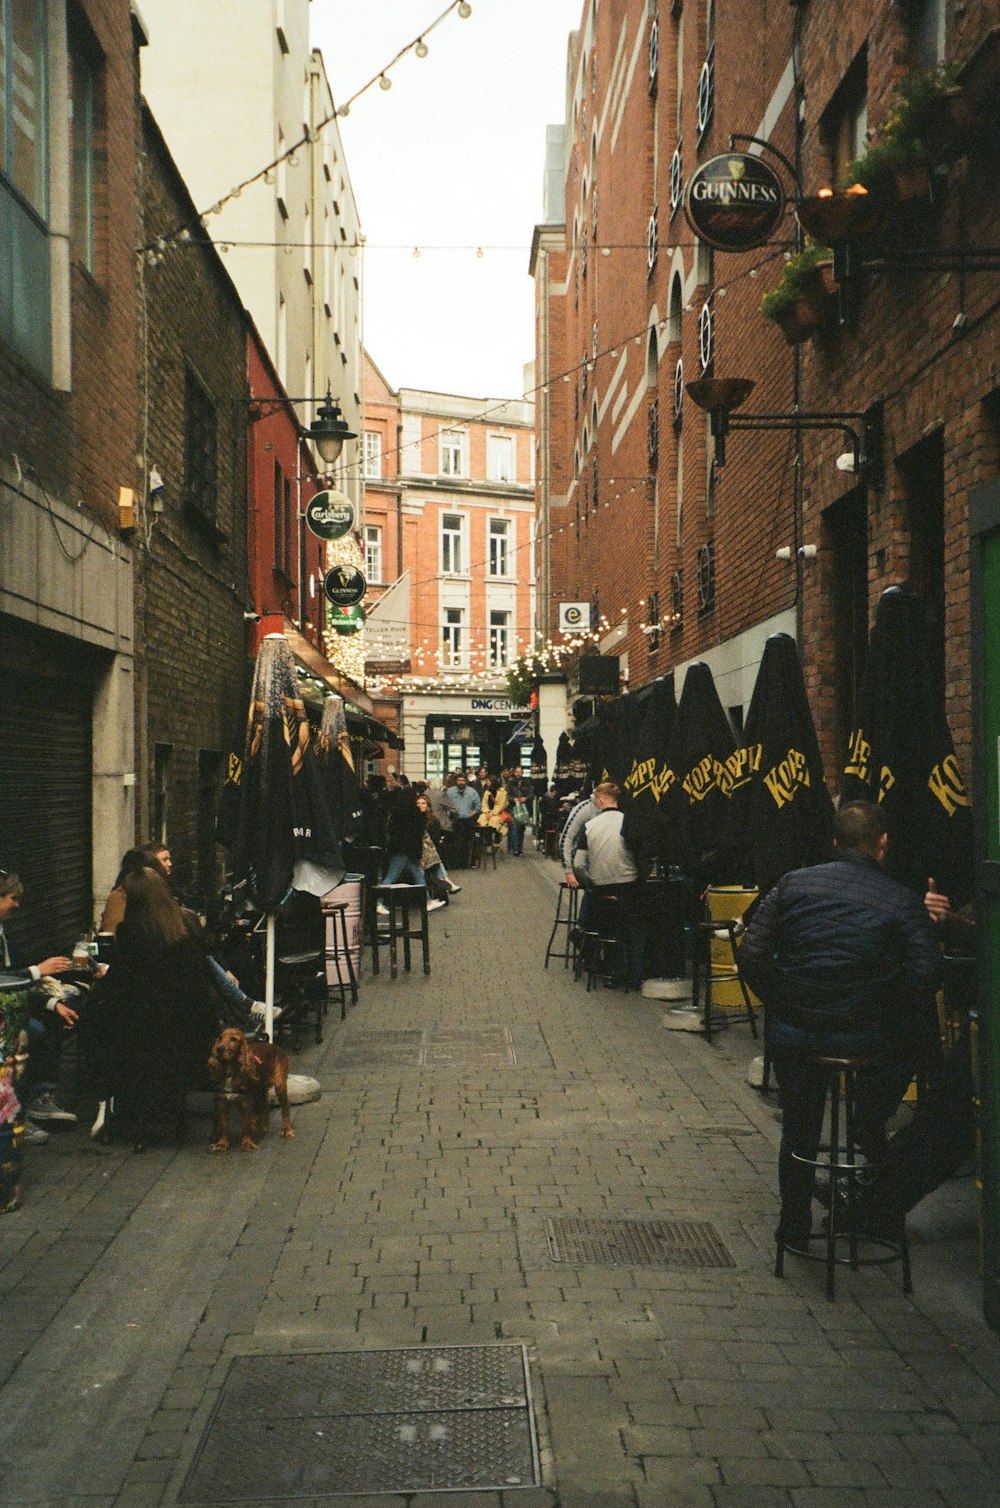 a group of people sitting at tables in an alley